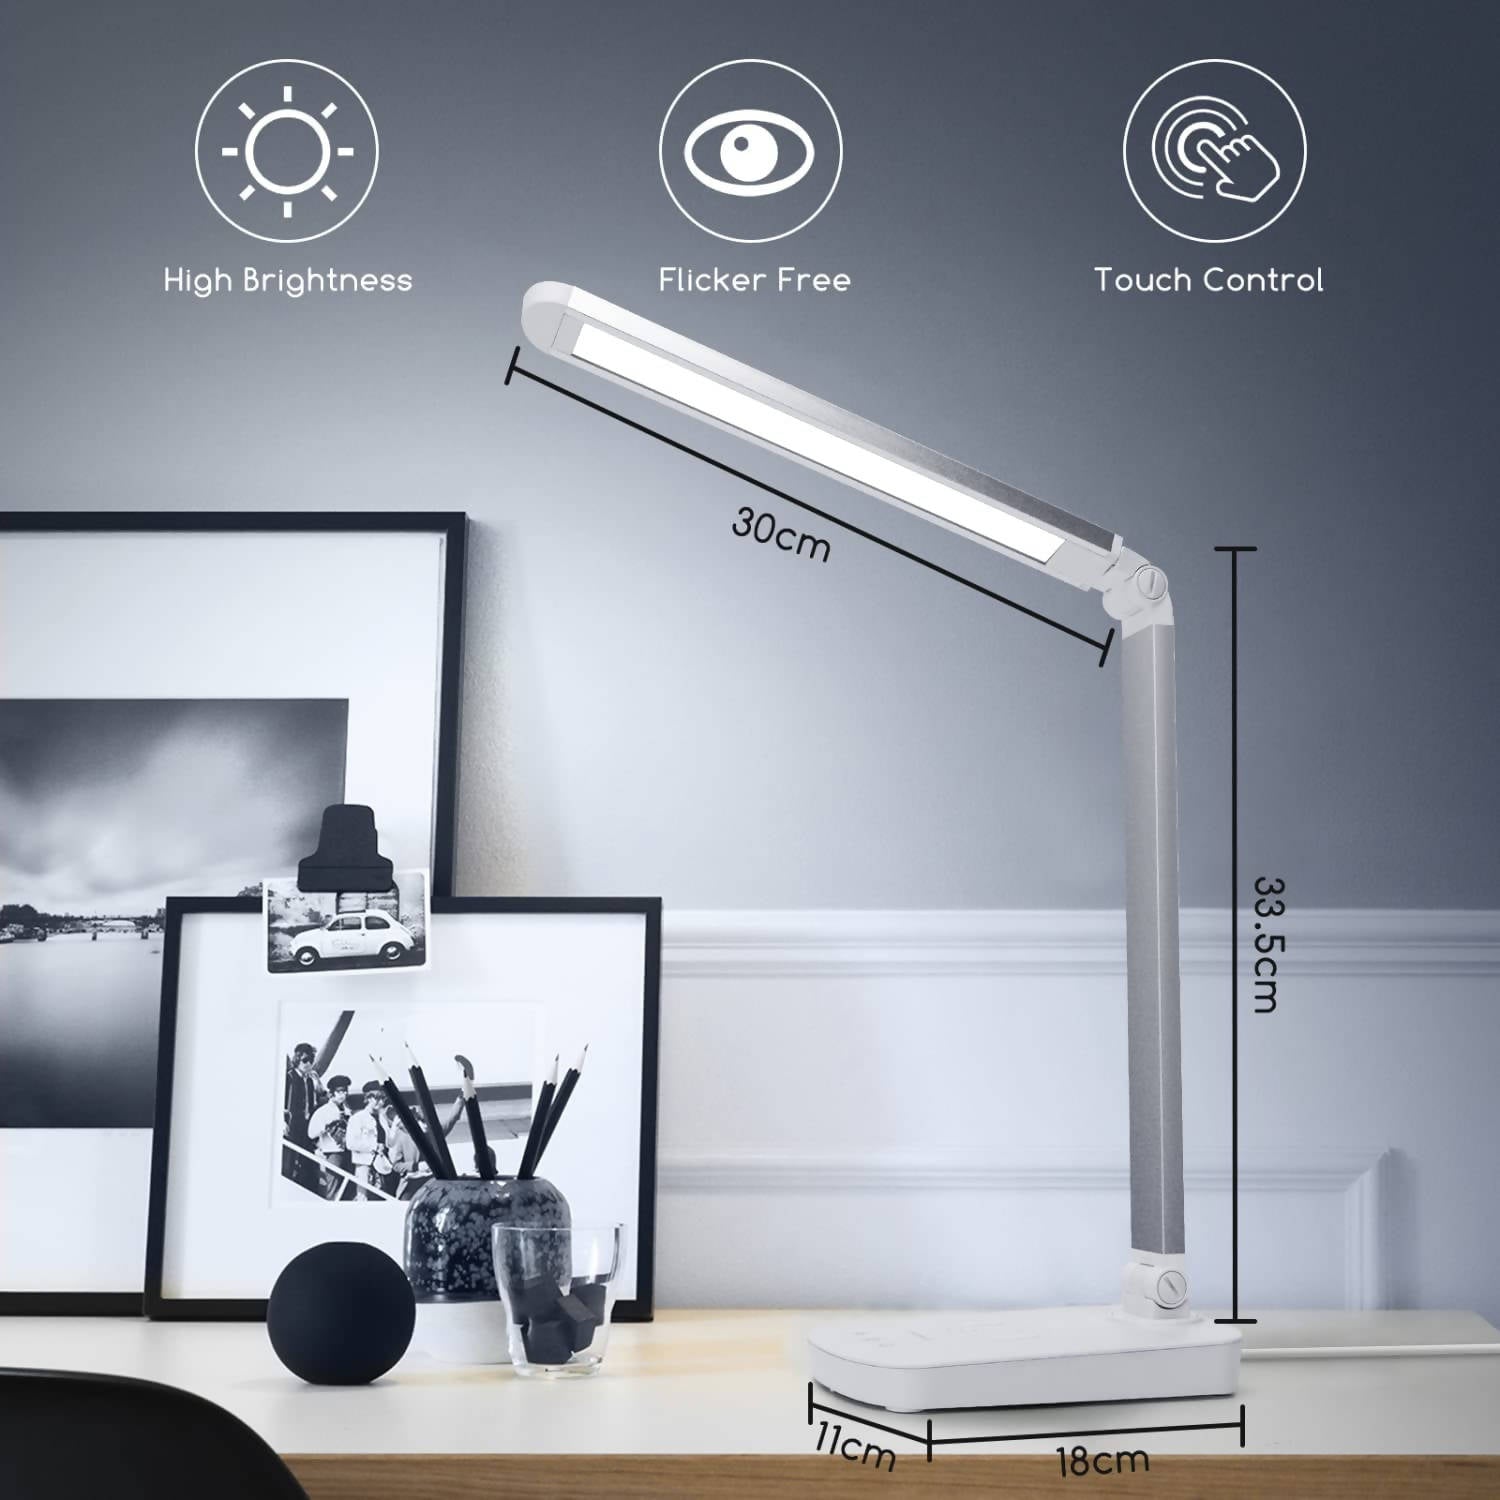 Aigostar LED Desk Lamp, Different Brightness Levels, Dimmable, Touch Operation, 10 Watt, Energy Class A+